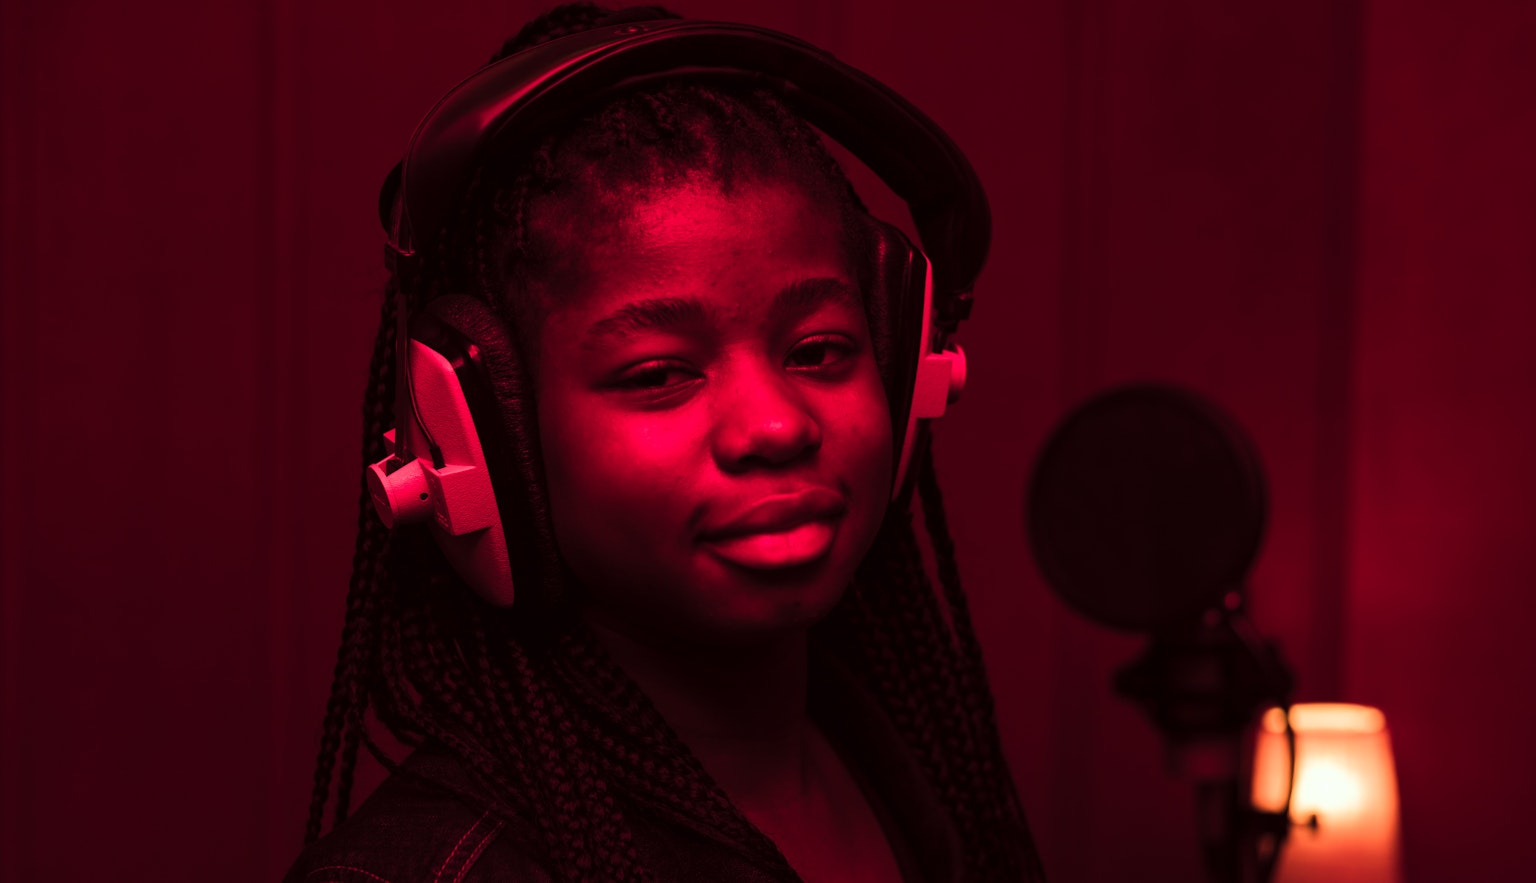 A young black girl in a recording studio with headphones on. The room has a deep red glow to it.